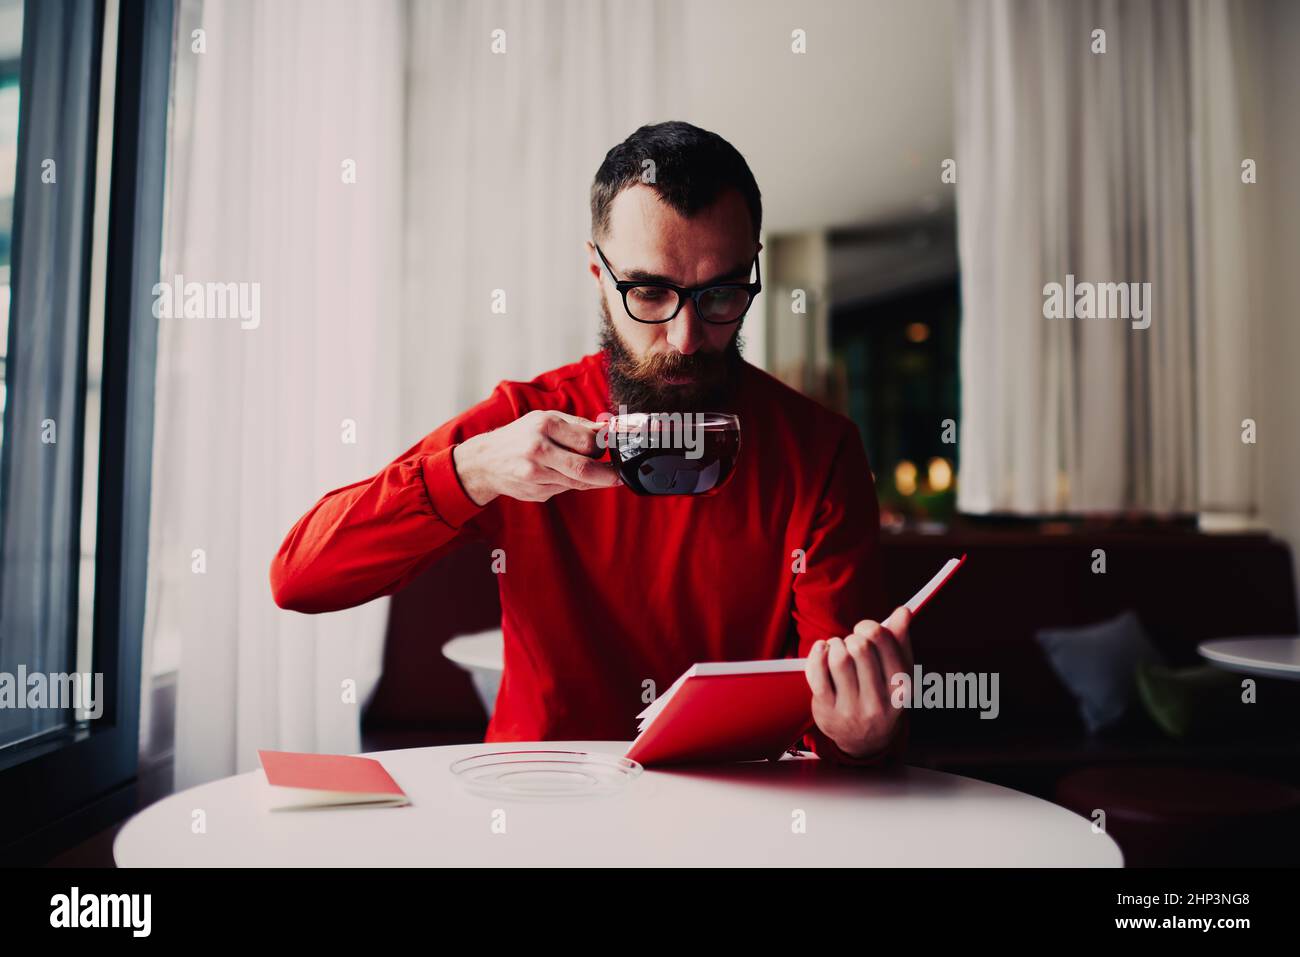 Man with notebook drinking tea during break Stock Photo